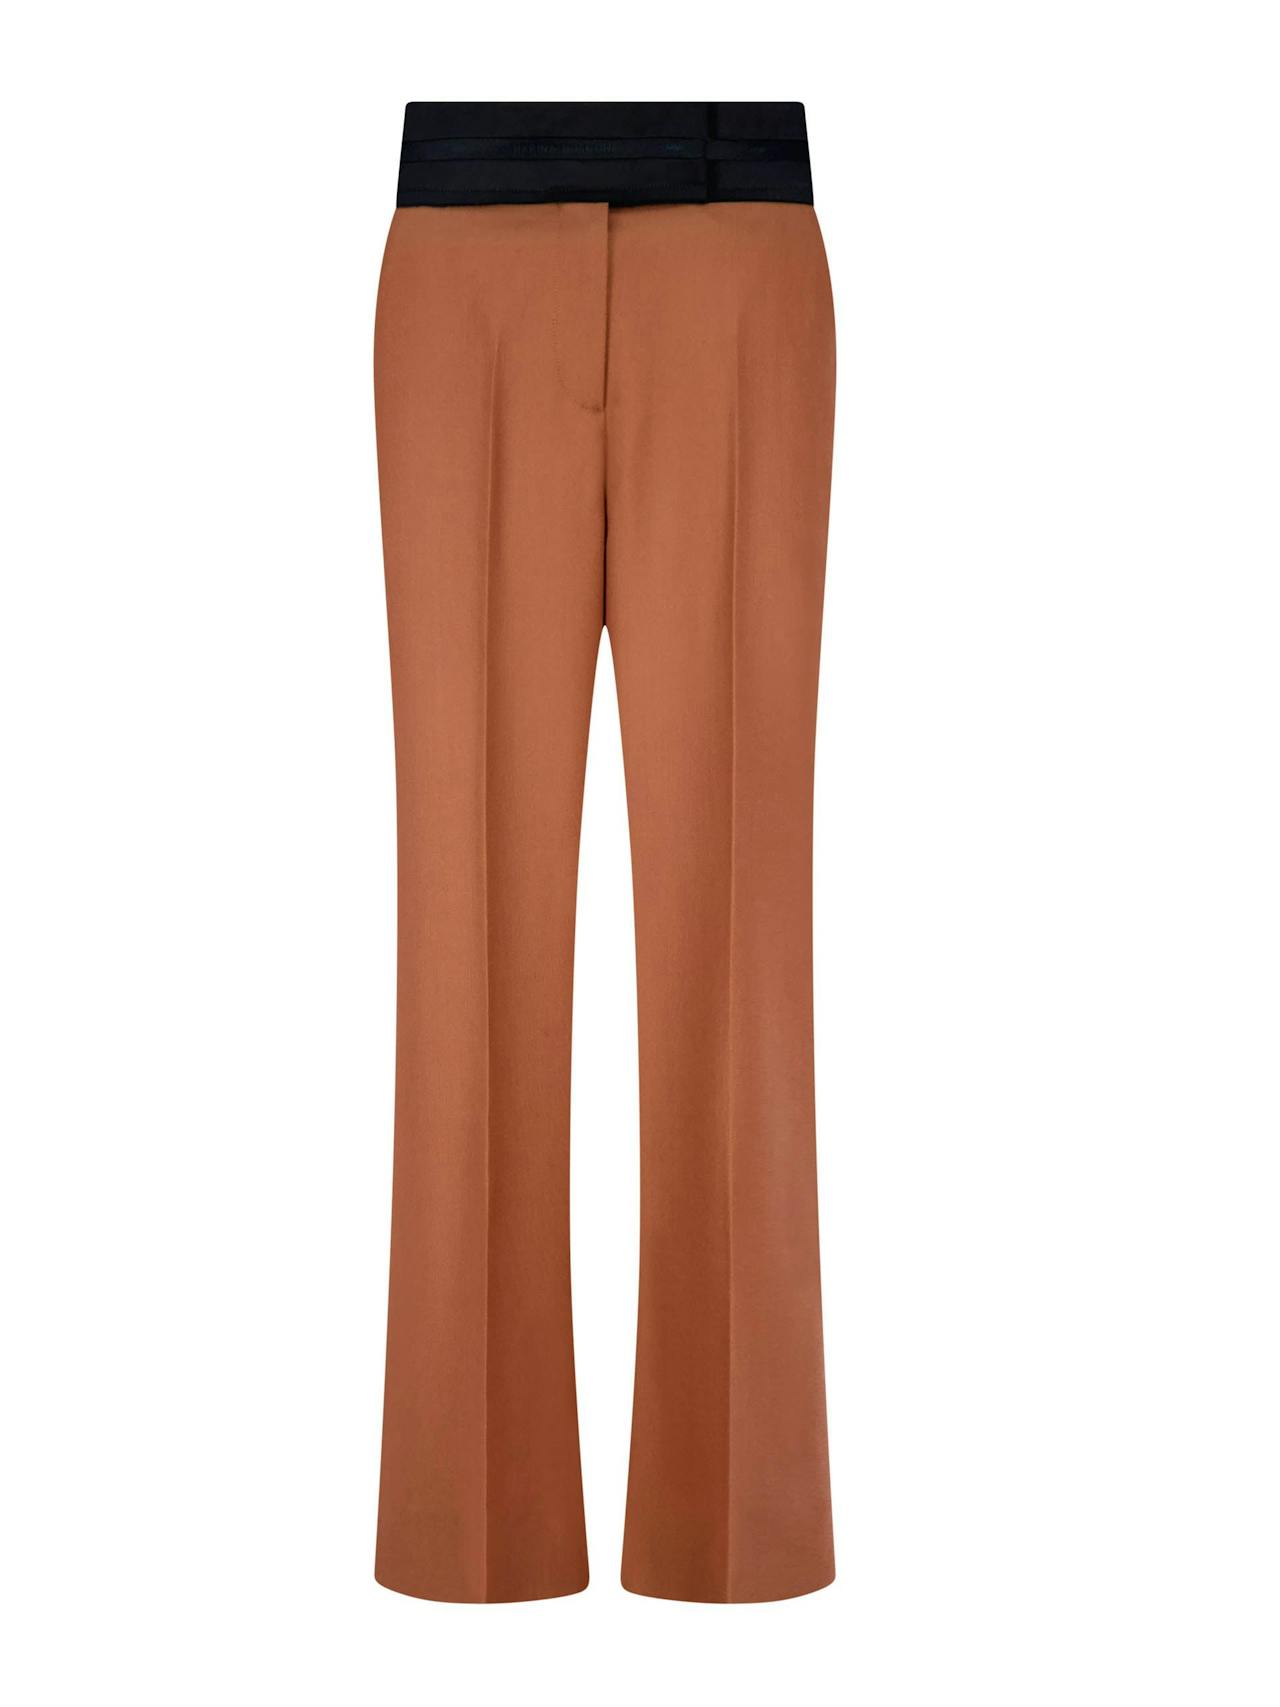 Brown relaxed trouser with raw edge detail